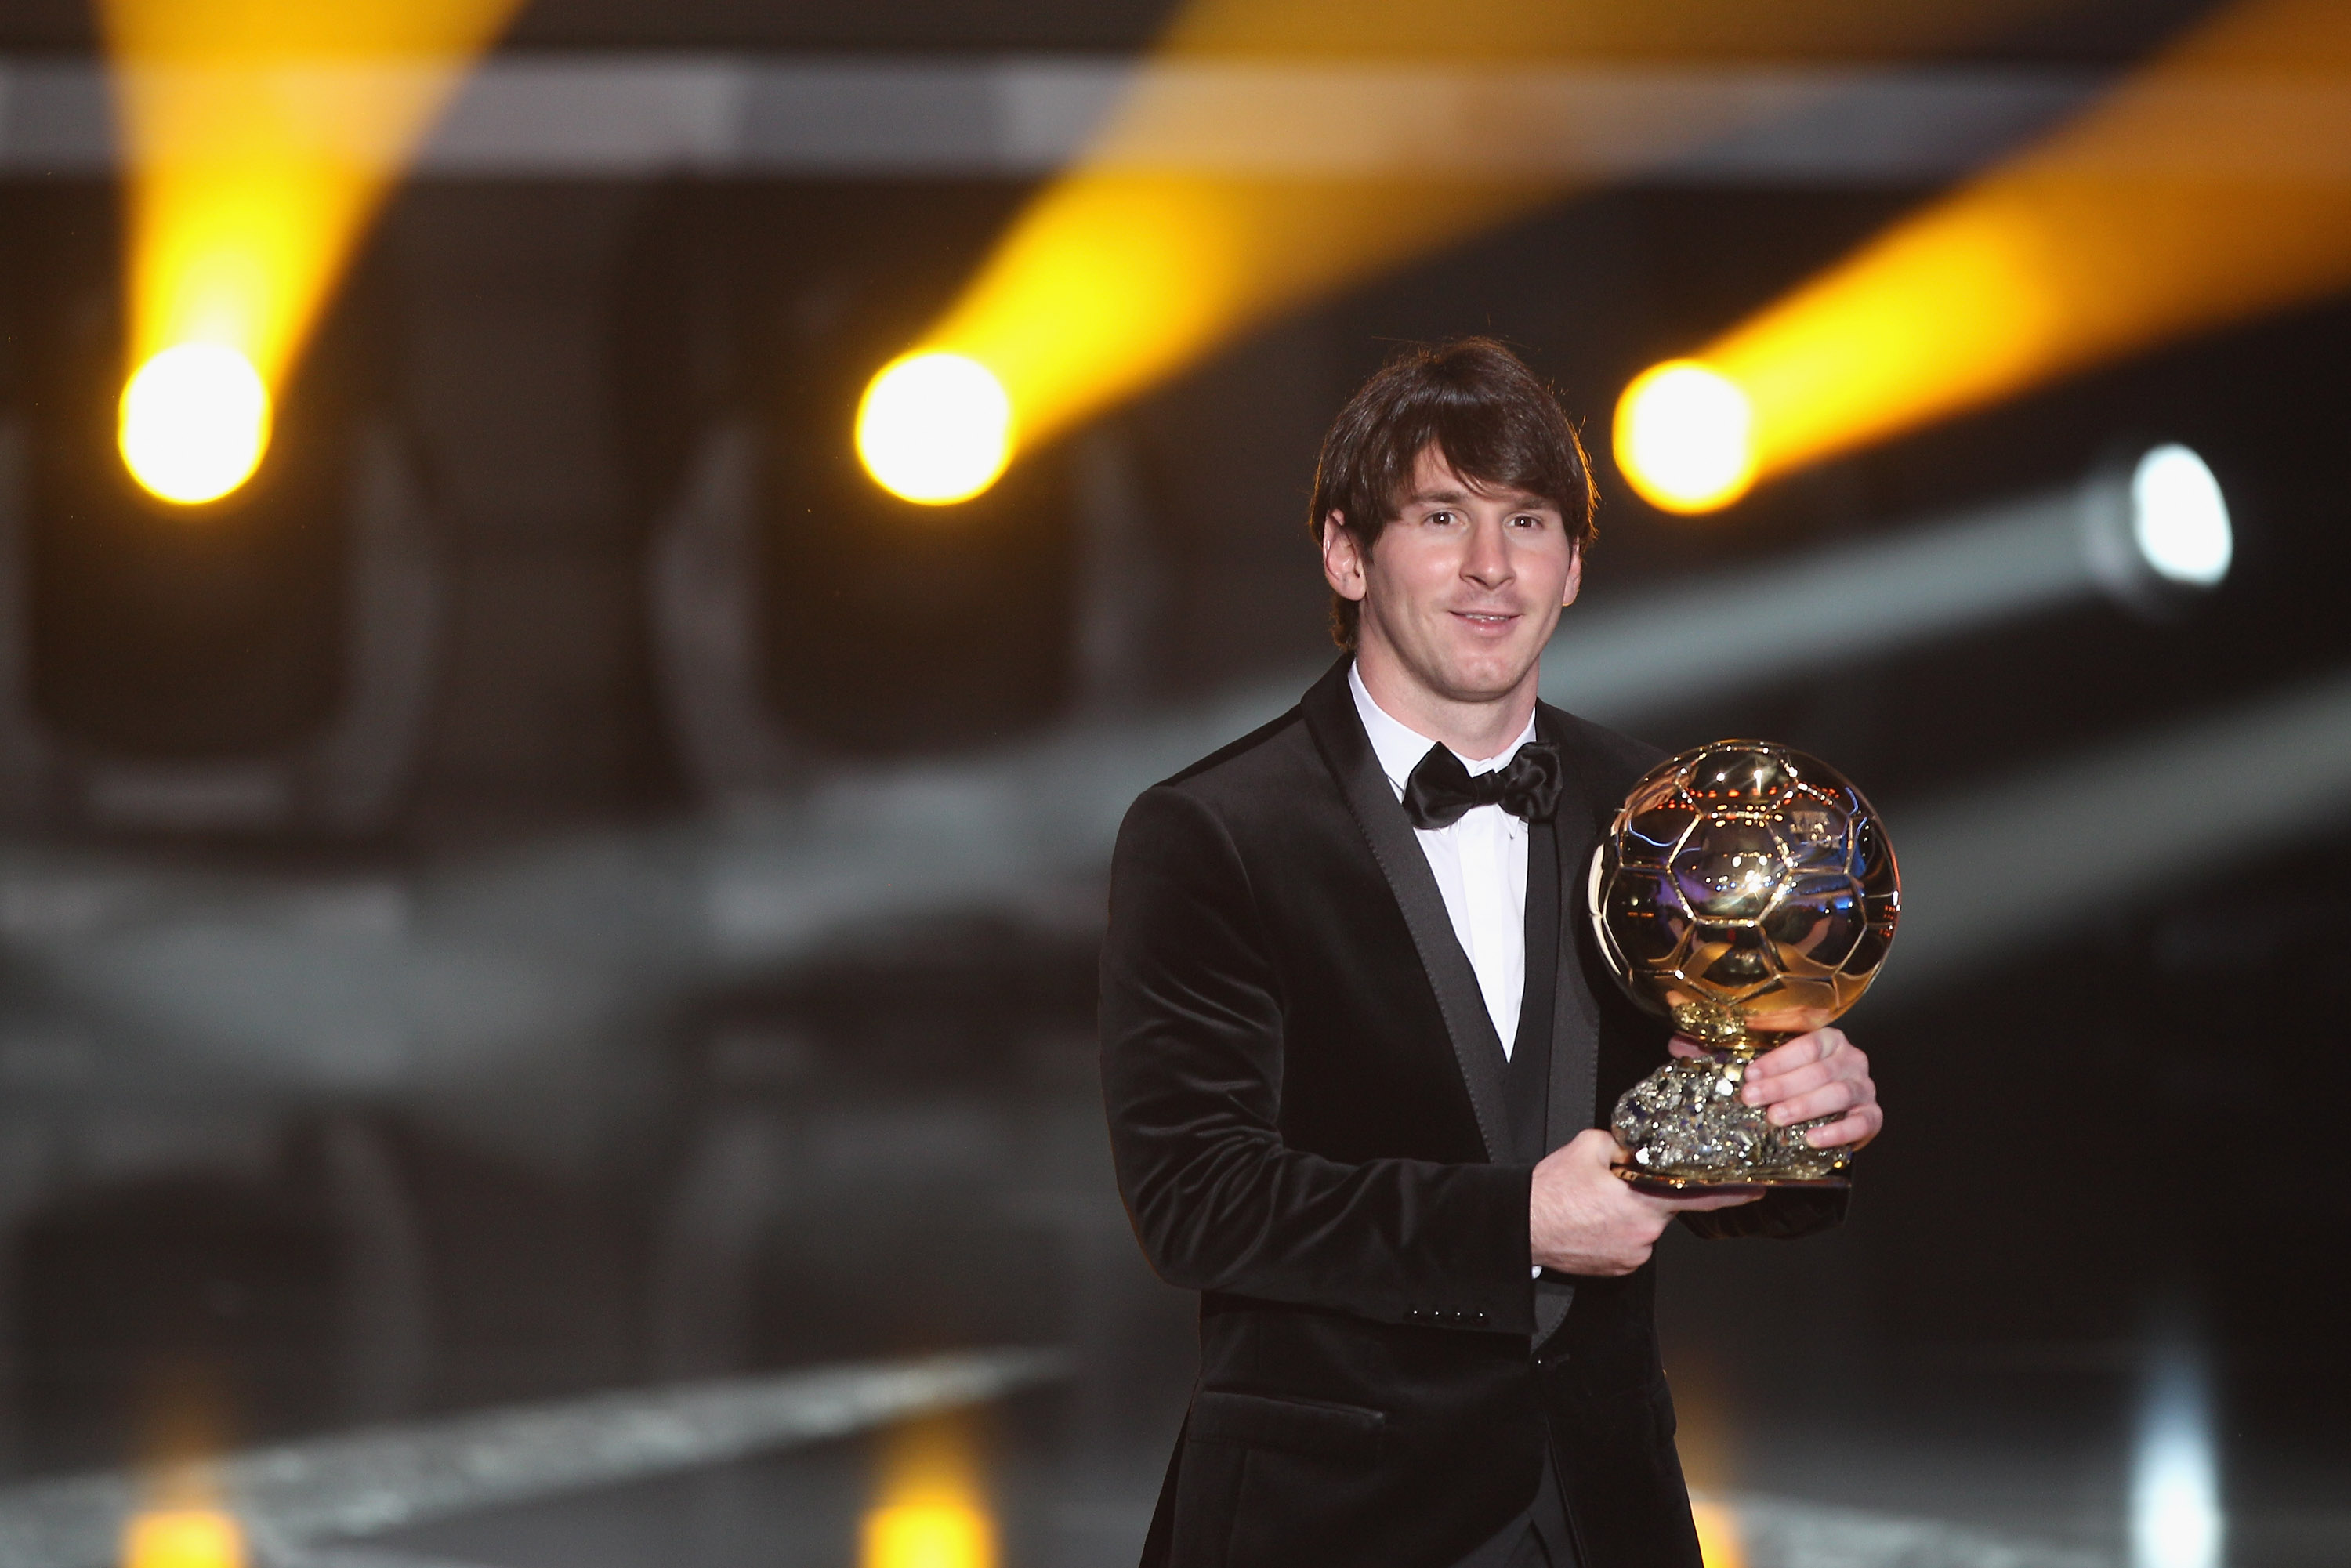 A third Ballon d'Or will be guaranteed if Messi and Argentina can win the Copa America this year